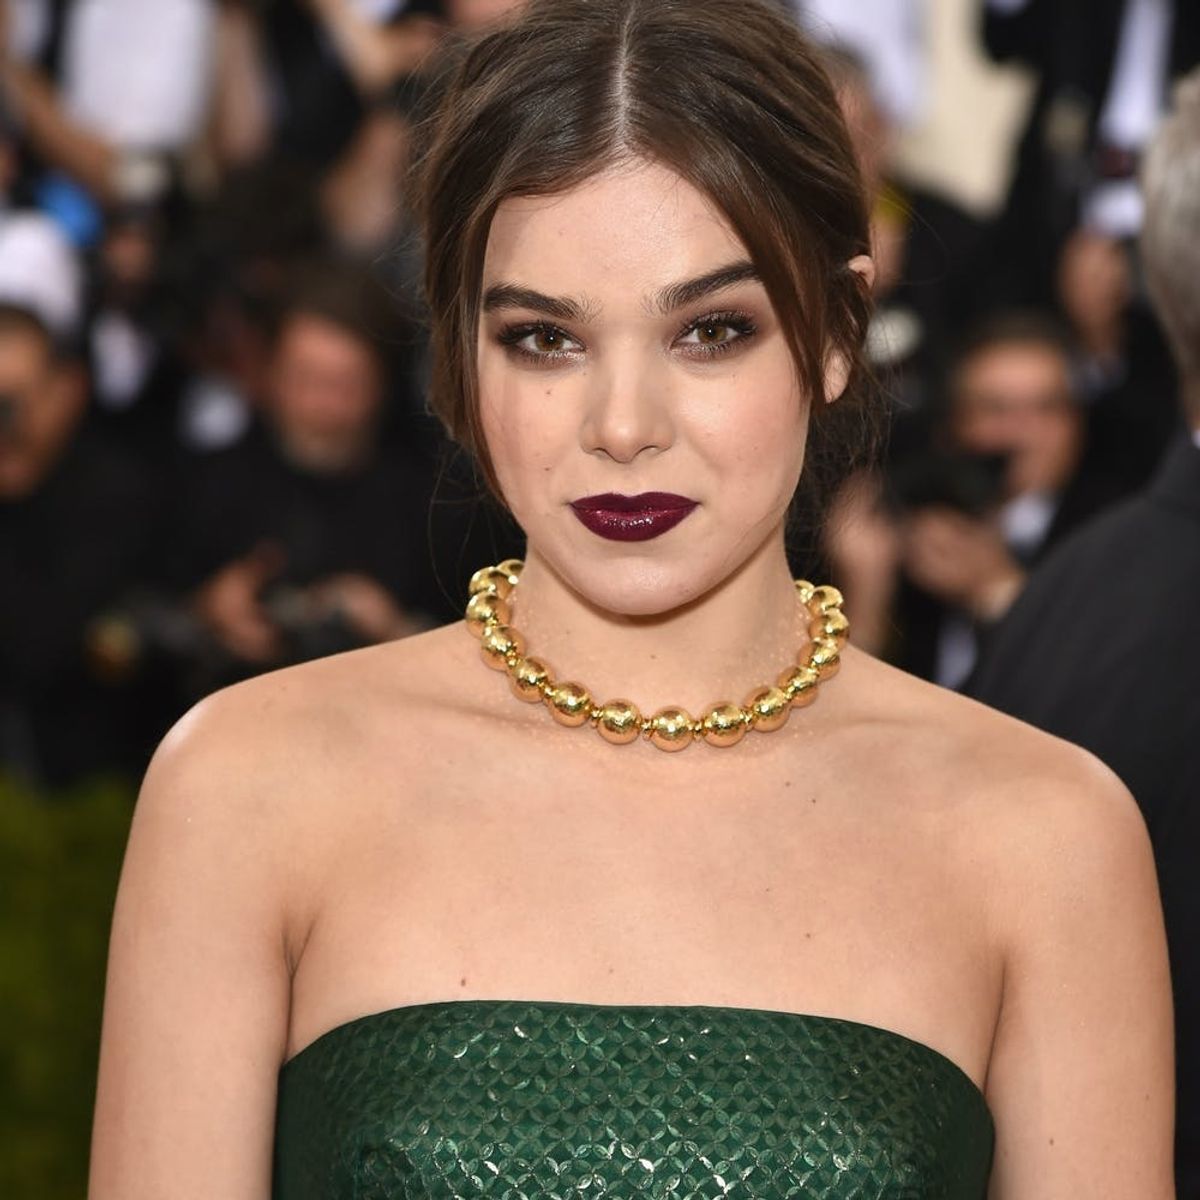 You’ll Never Guess Which Budget-Friendly Designer Hailee Steinfeld + Co. Wore to the Met Gala